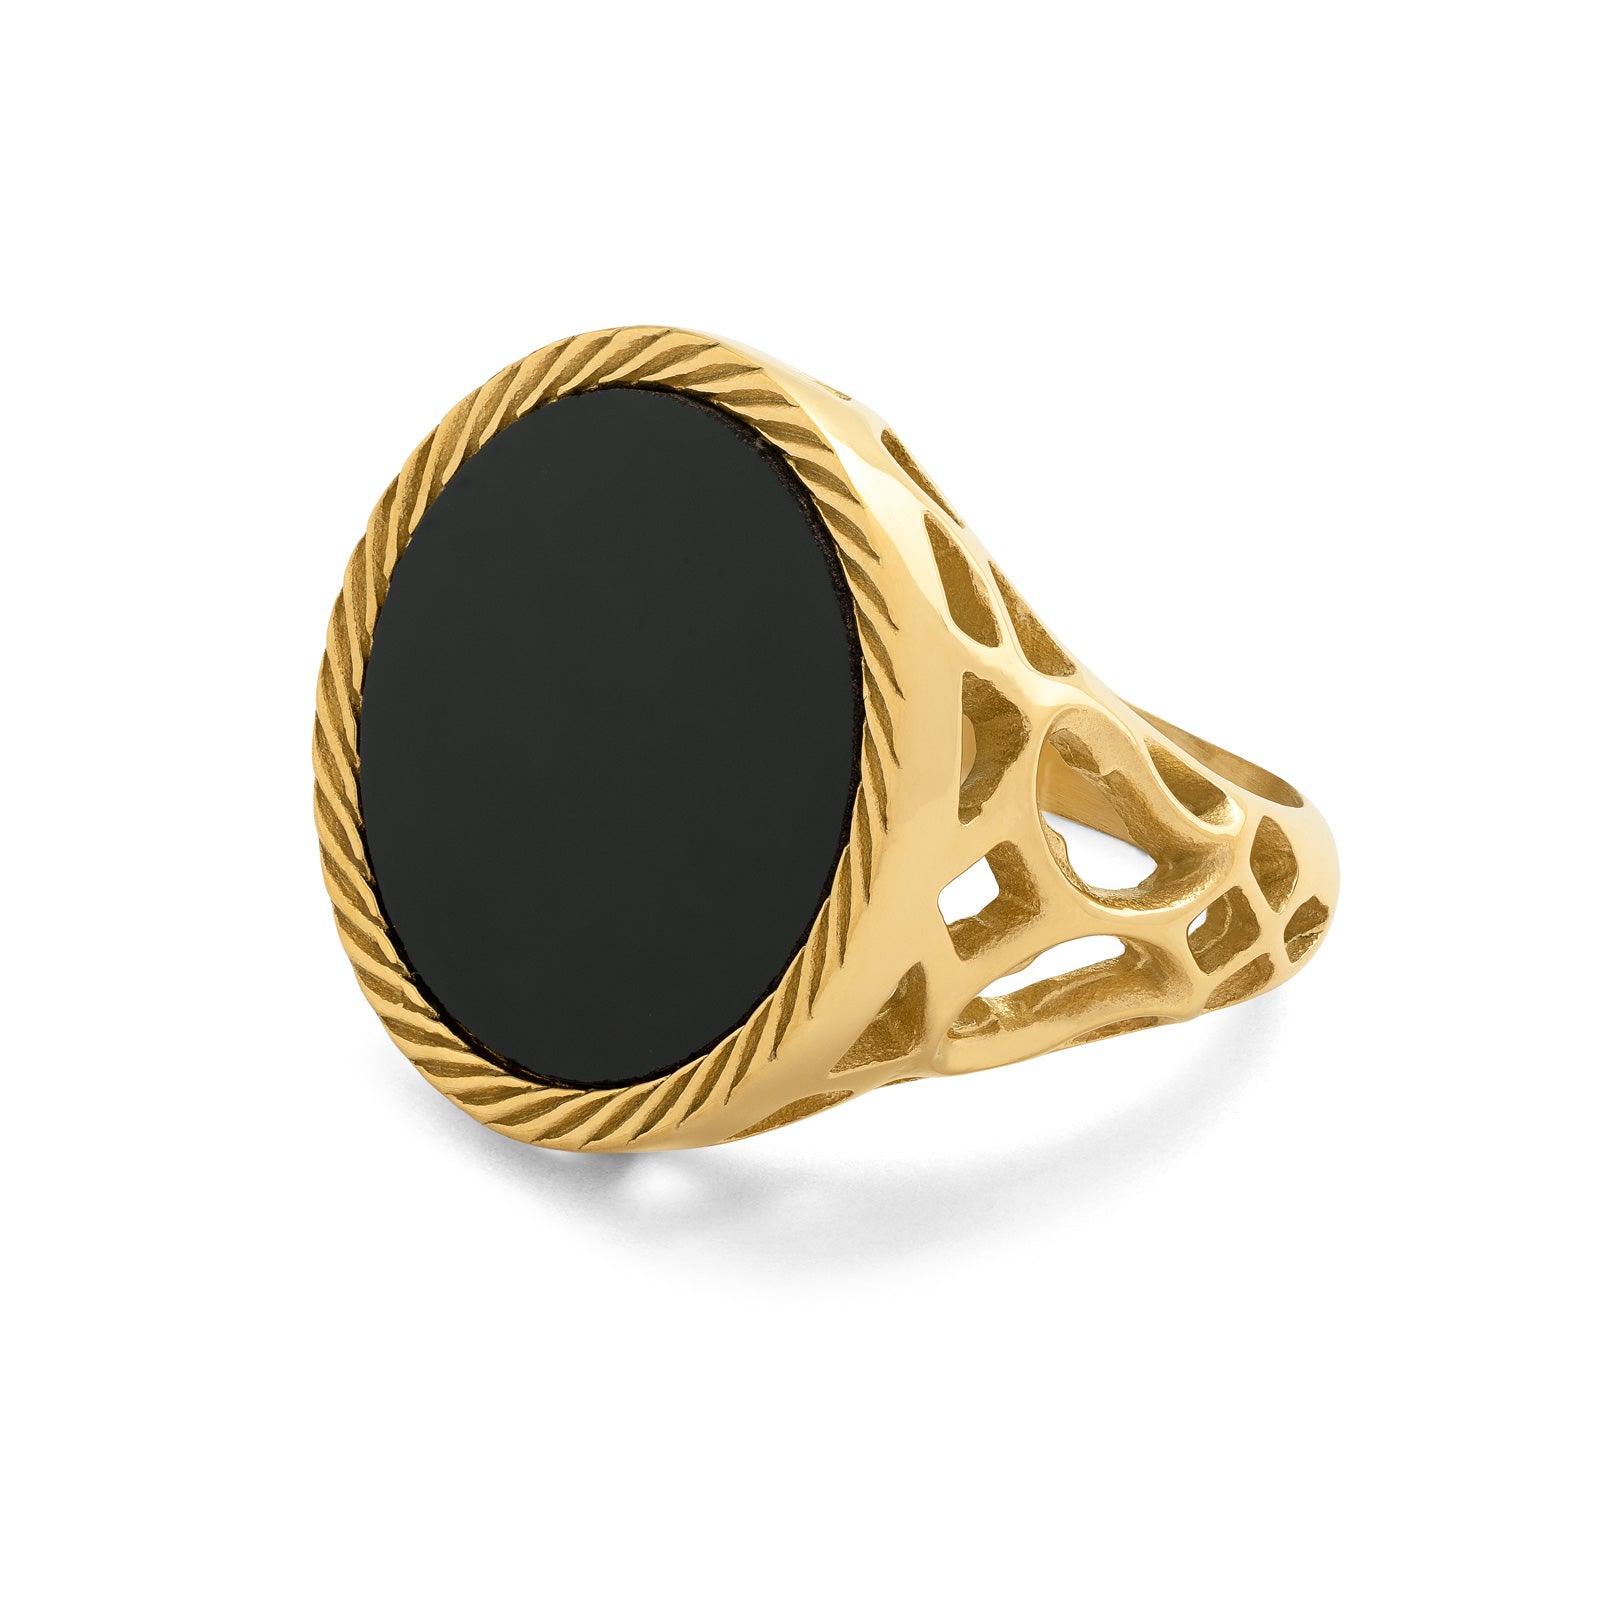 Gold signet ring with round onyx stone by statement collective